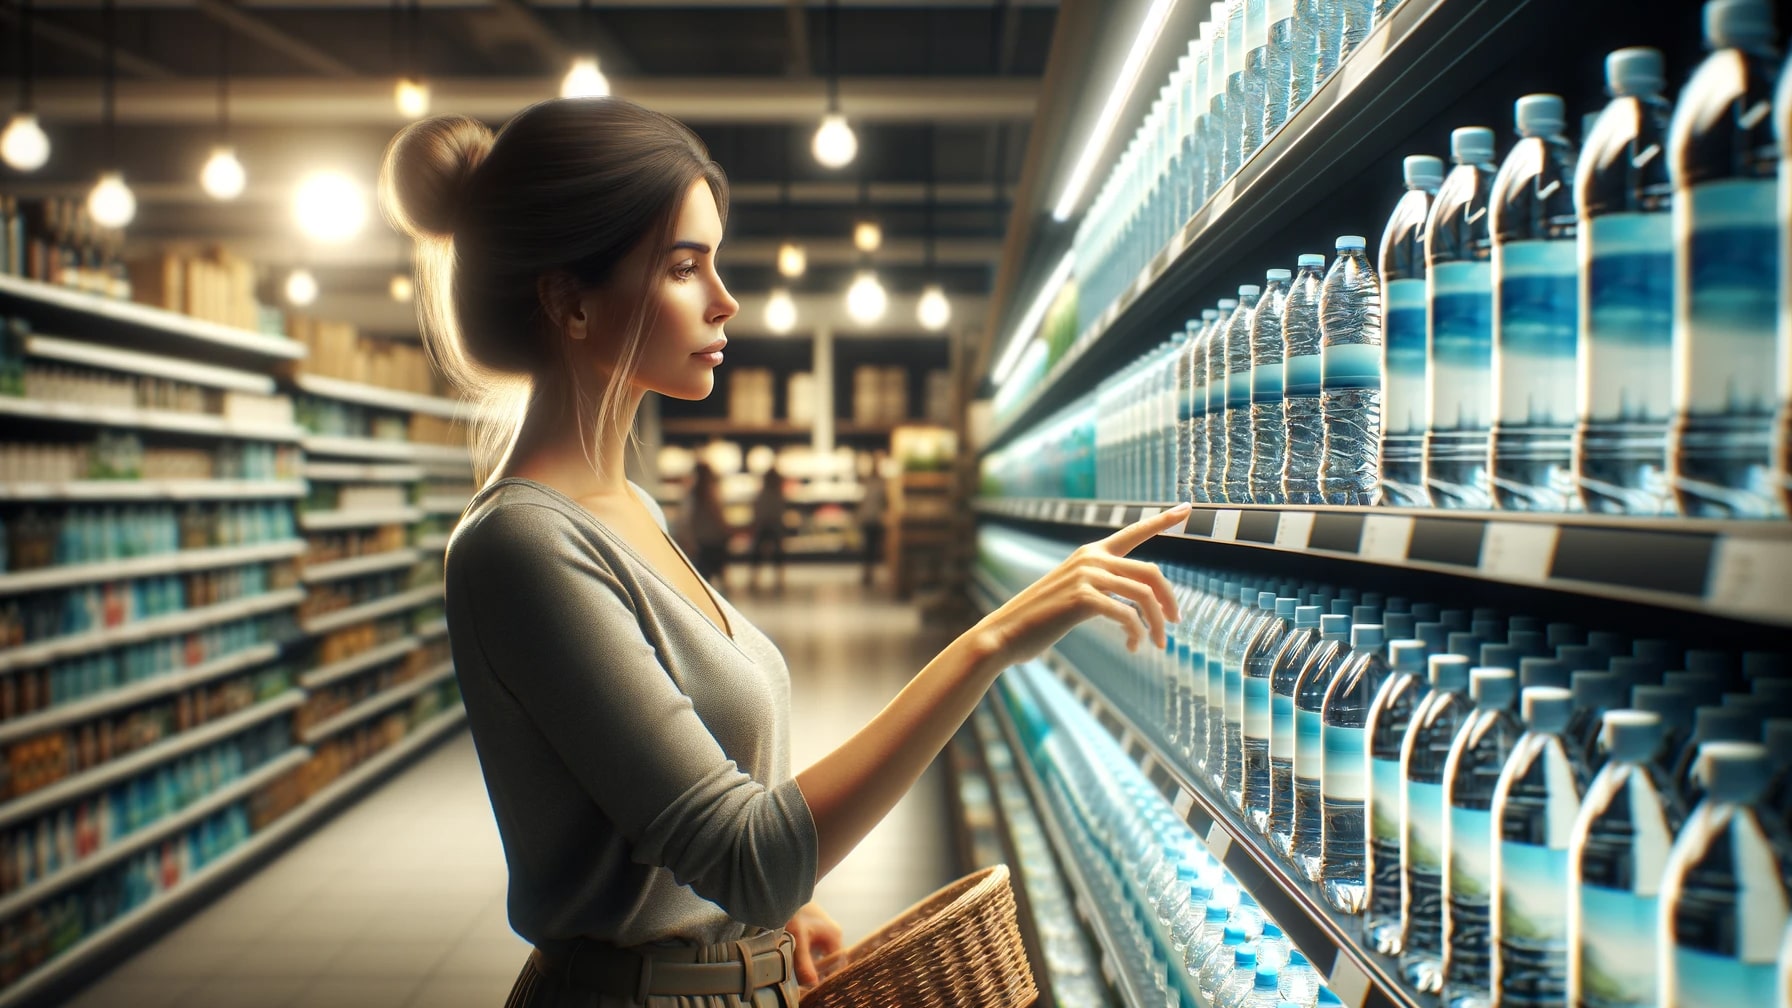 image that show a woman in store and she choose a water in shelf-min